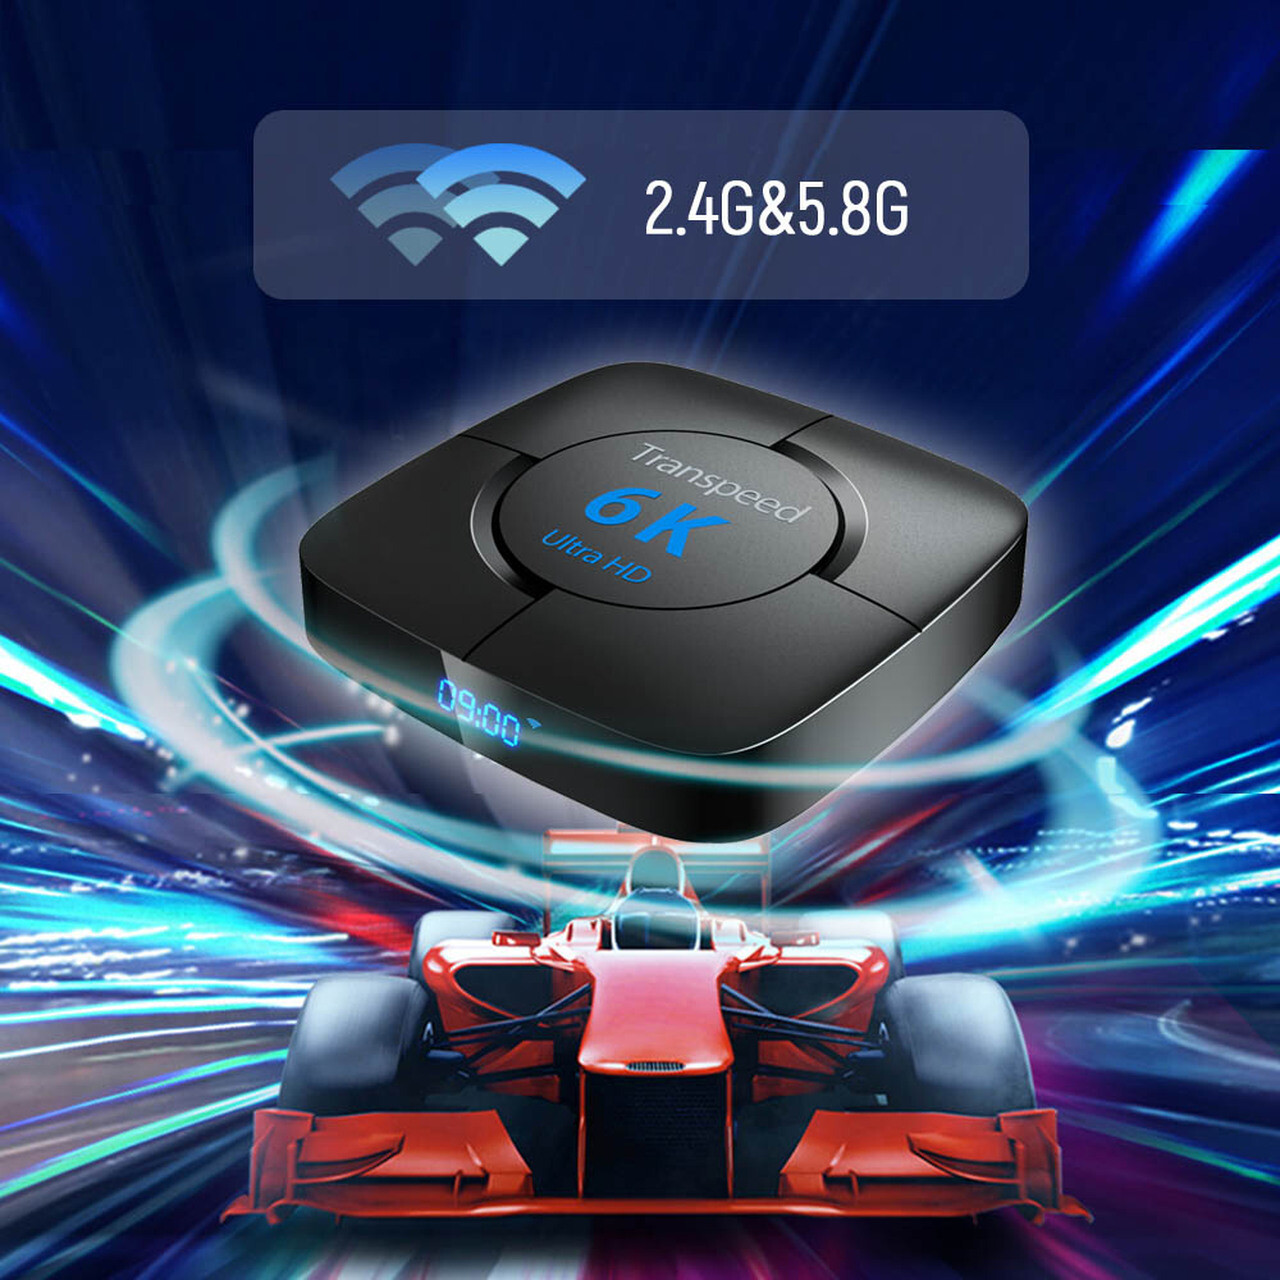 Transpeed Android 10.0 Tv Box Voice Assistant